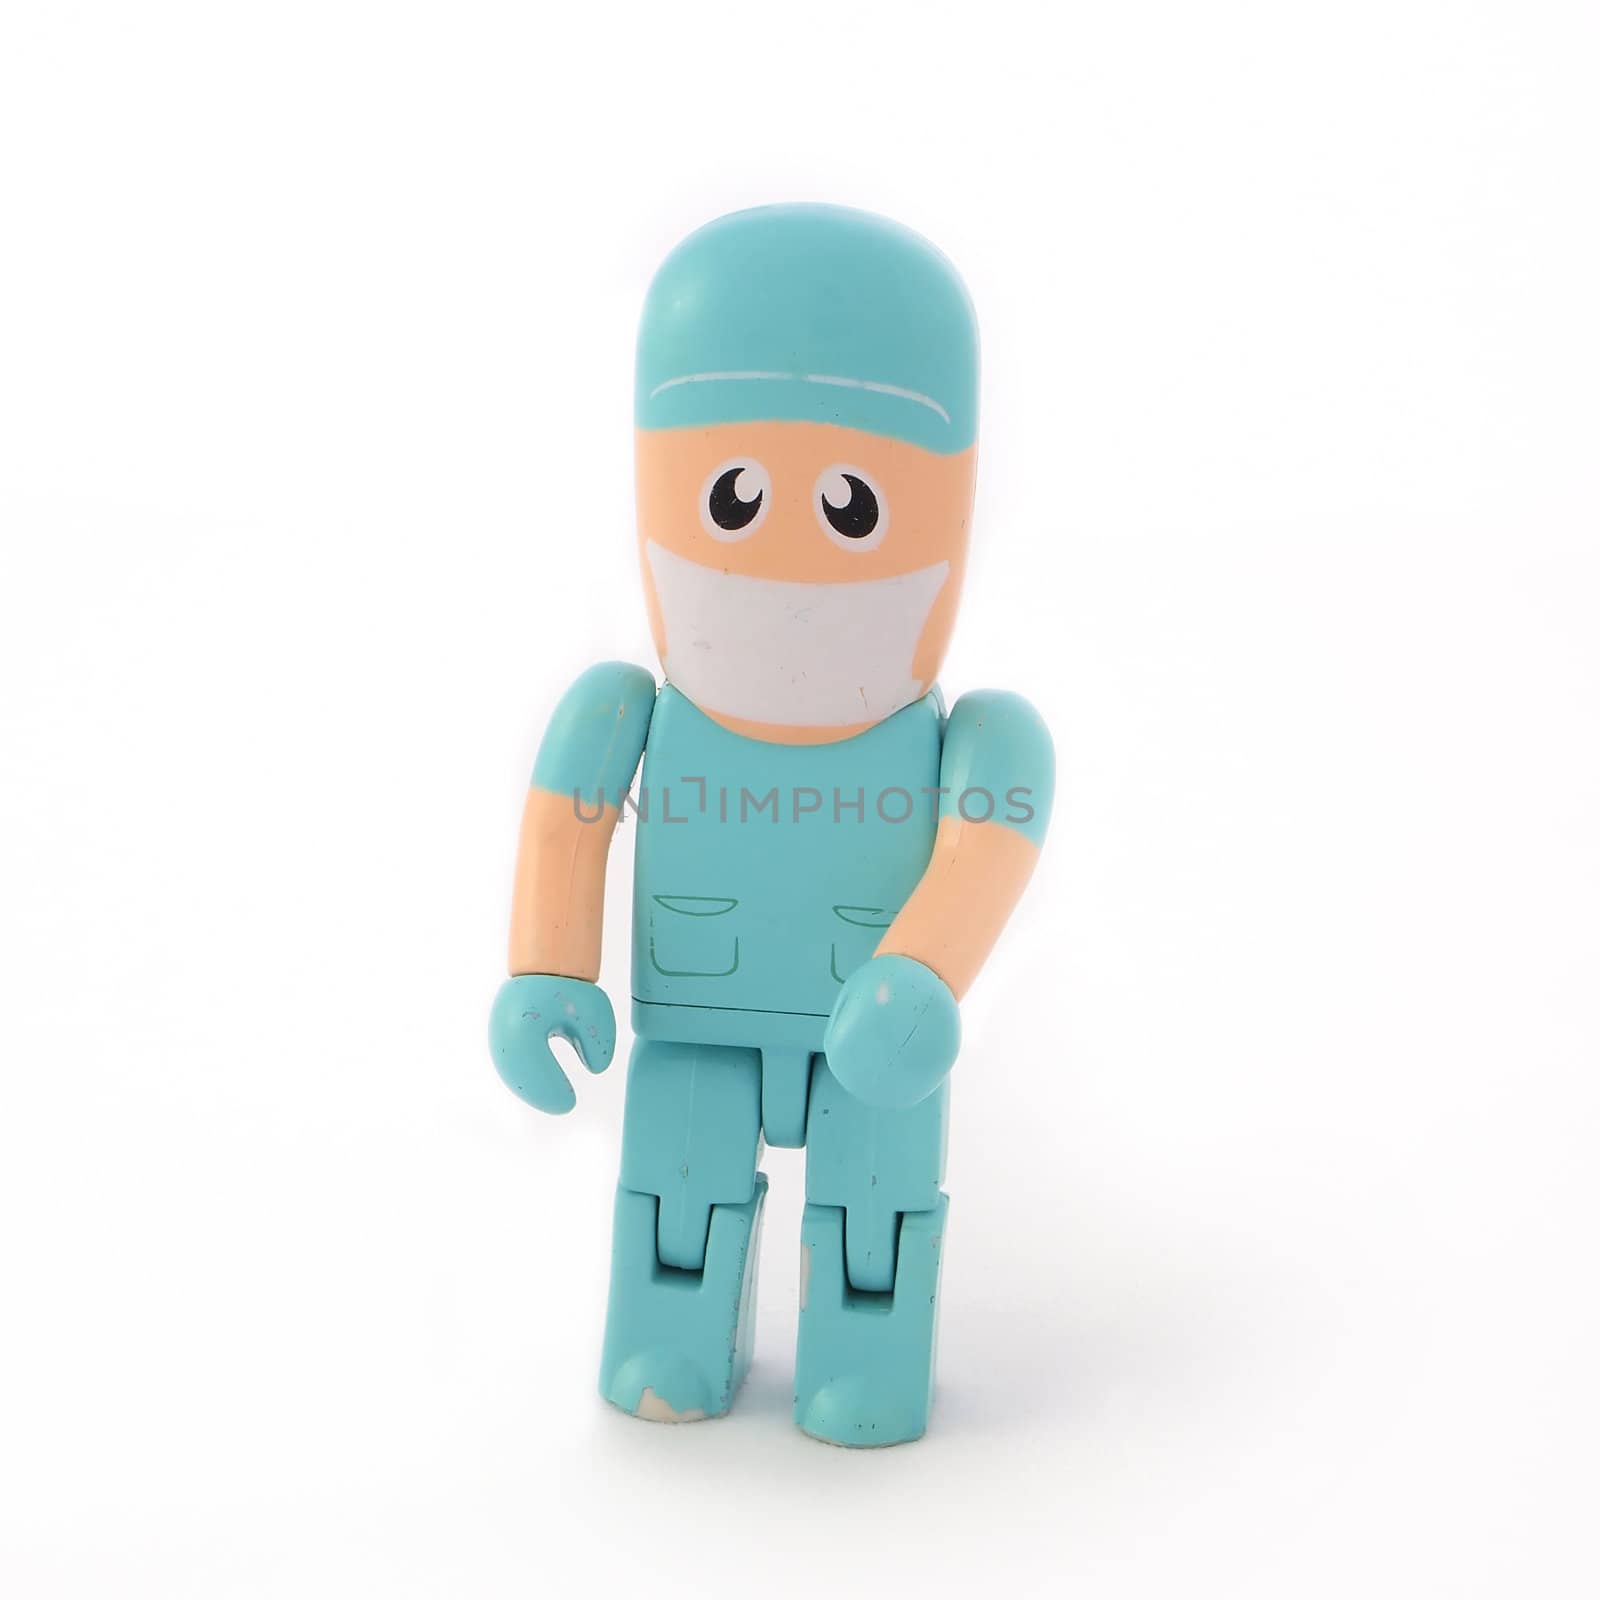 Plastic toy puppet of a surgeon figure wearing green surgery scrubs, isolated on a white background.